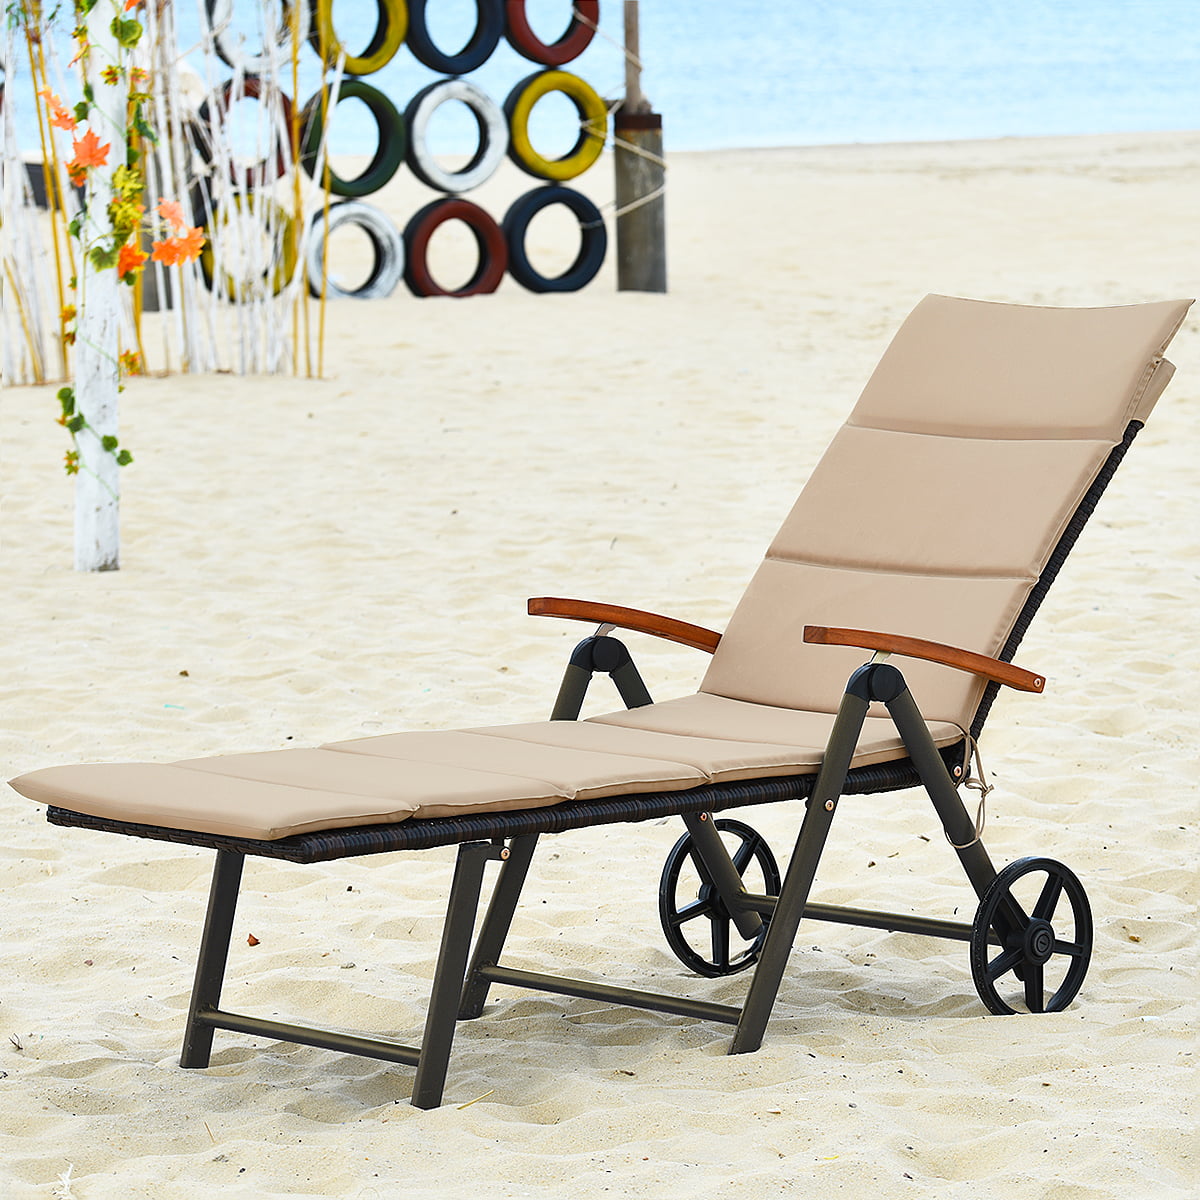 COSTWAY Folding Outdoor Pool Chaise Lounge Chair Aluminum Rattan